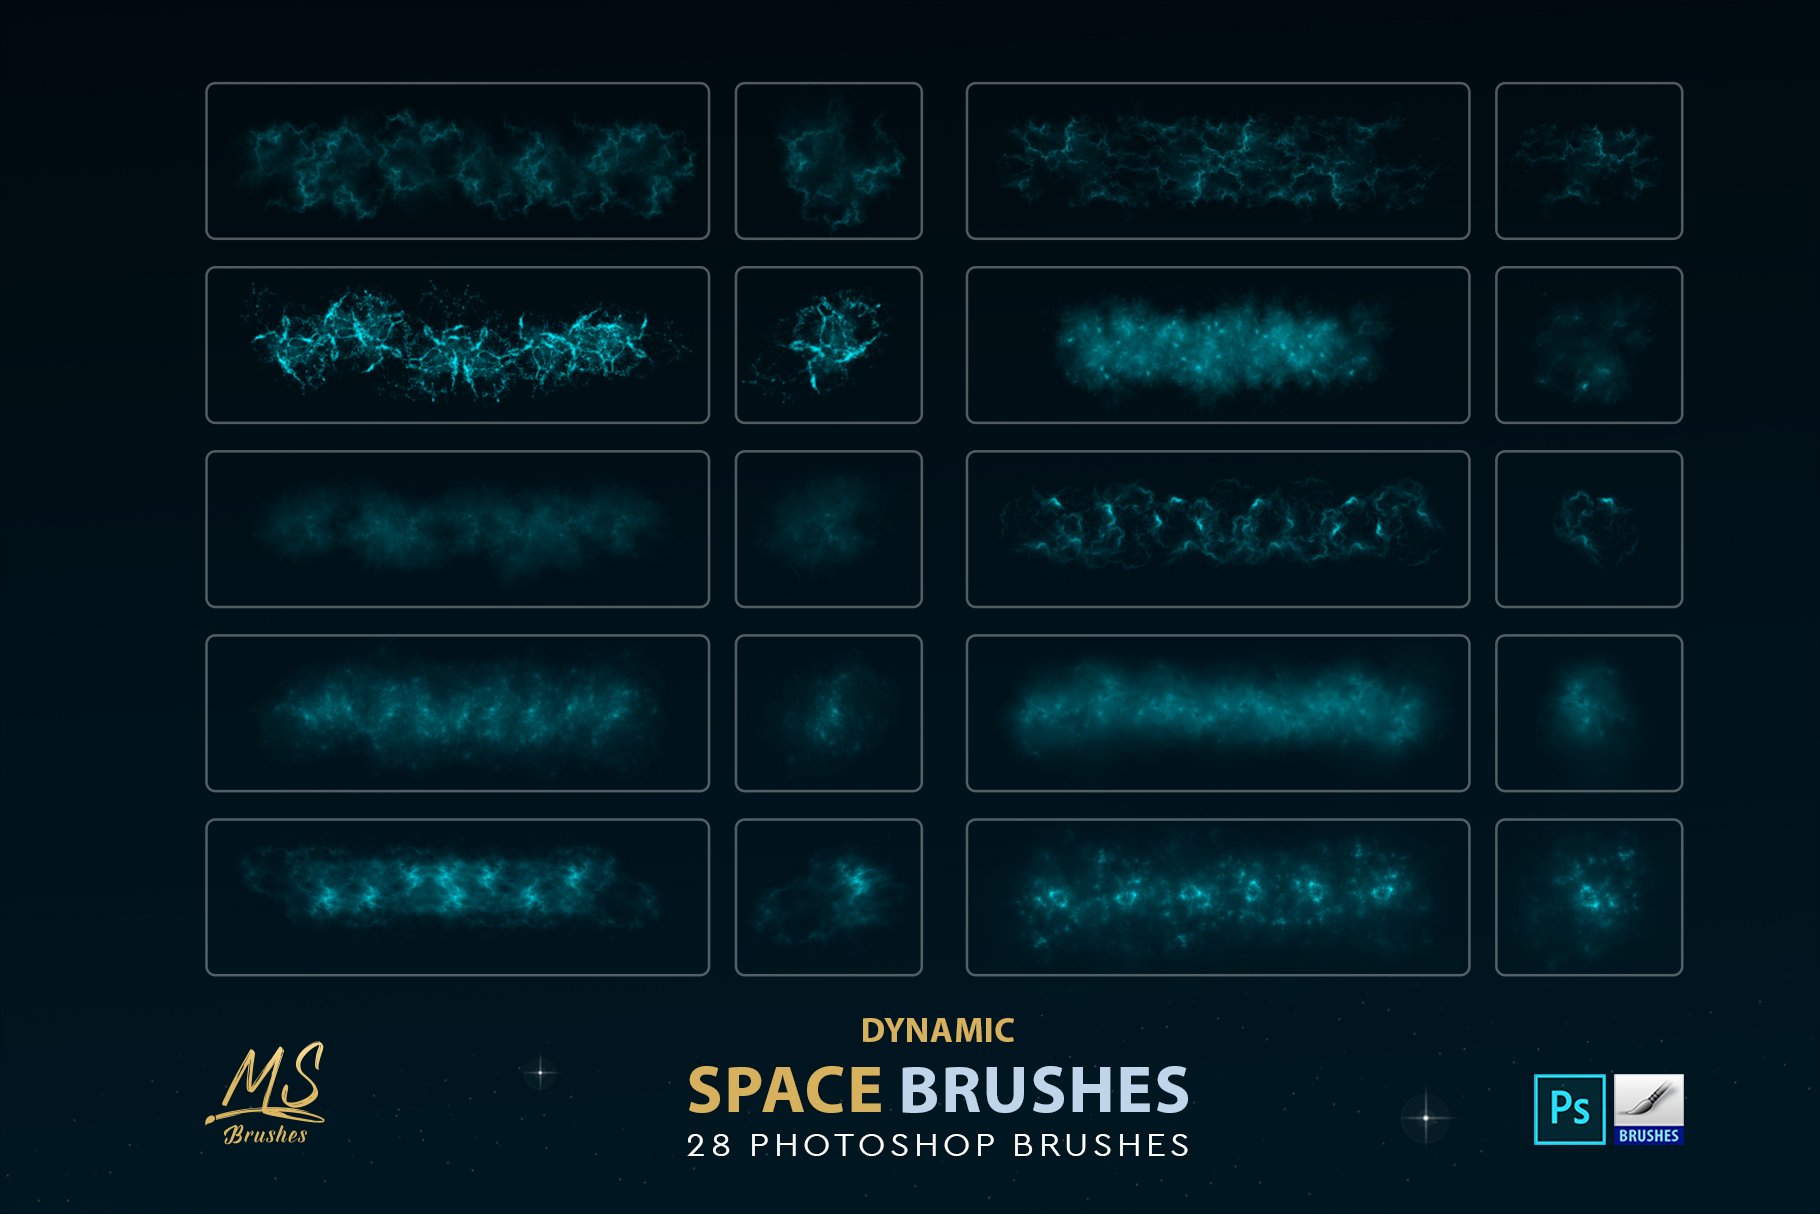 Space Brushespreview image.